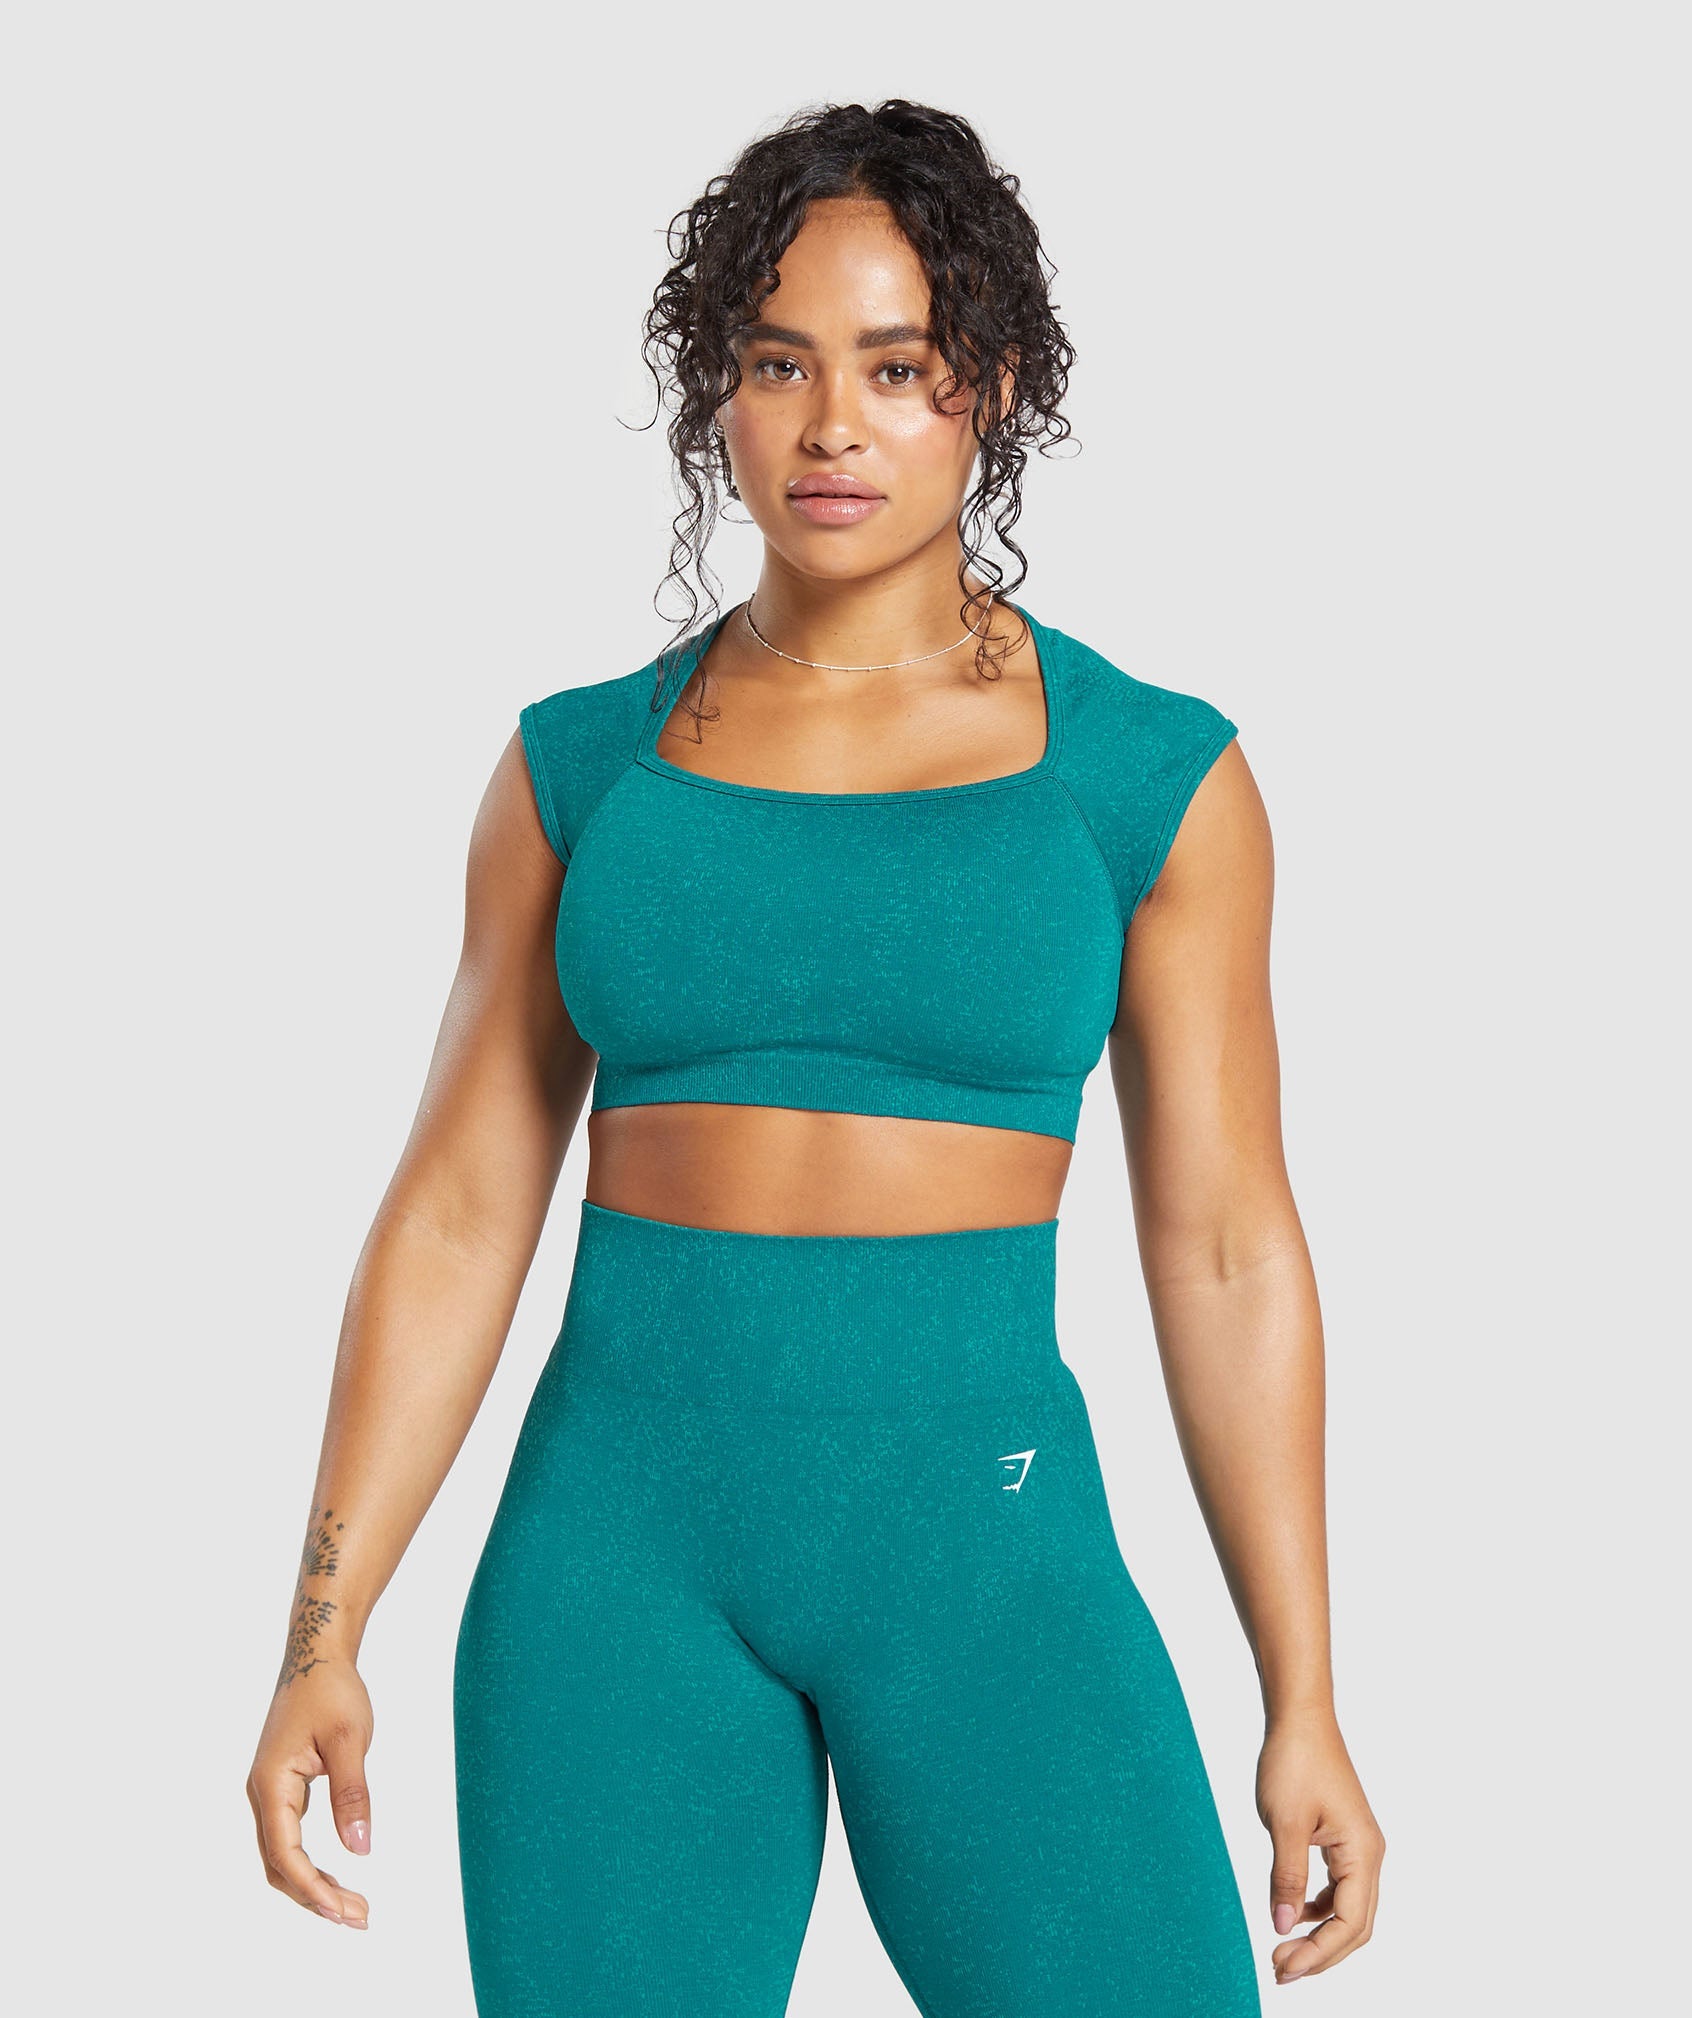 Gymshark Adapt Animal Seamless Green Camo Sports Bra Large - $20 - From  Colleen